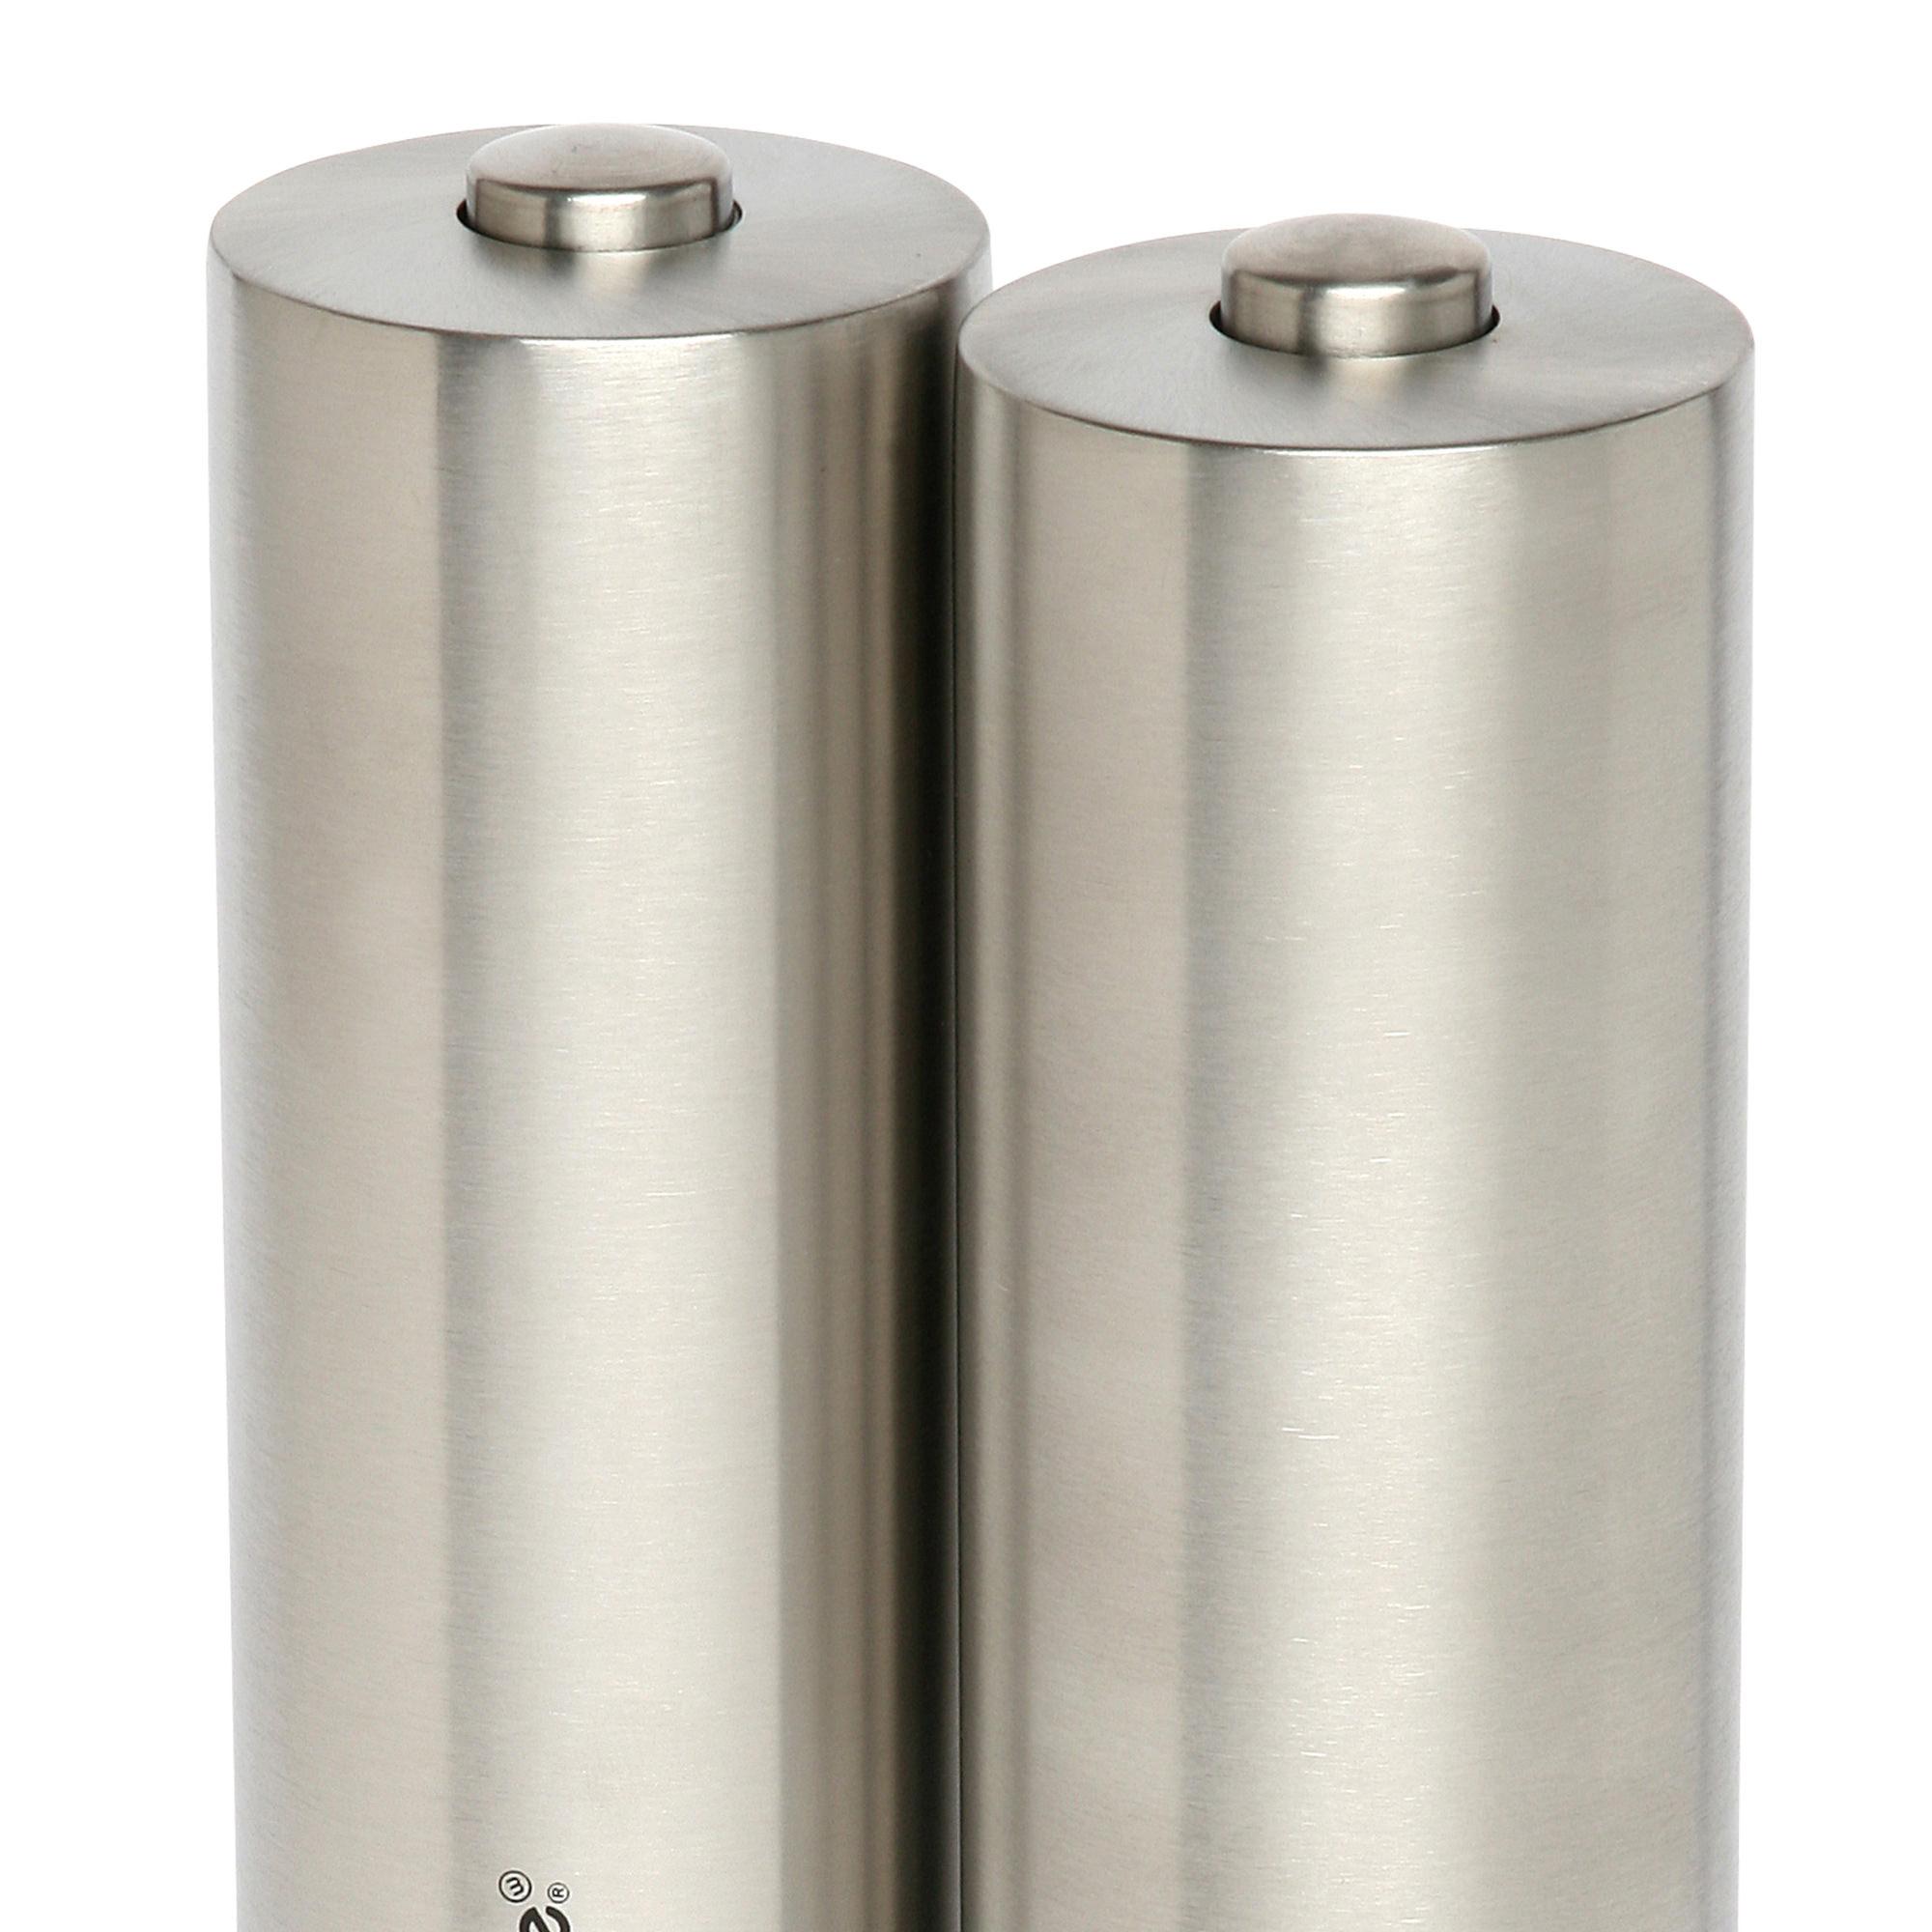 Wiltshire Electric Mill Set Stainless Steel Image 3